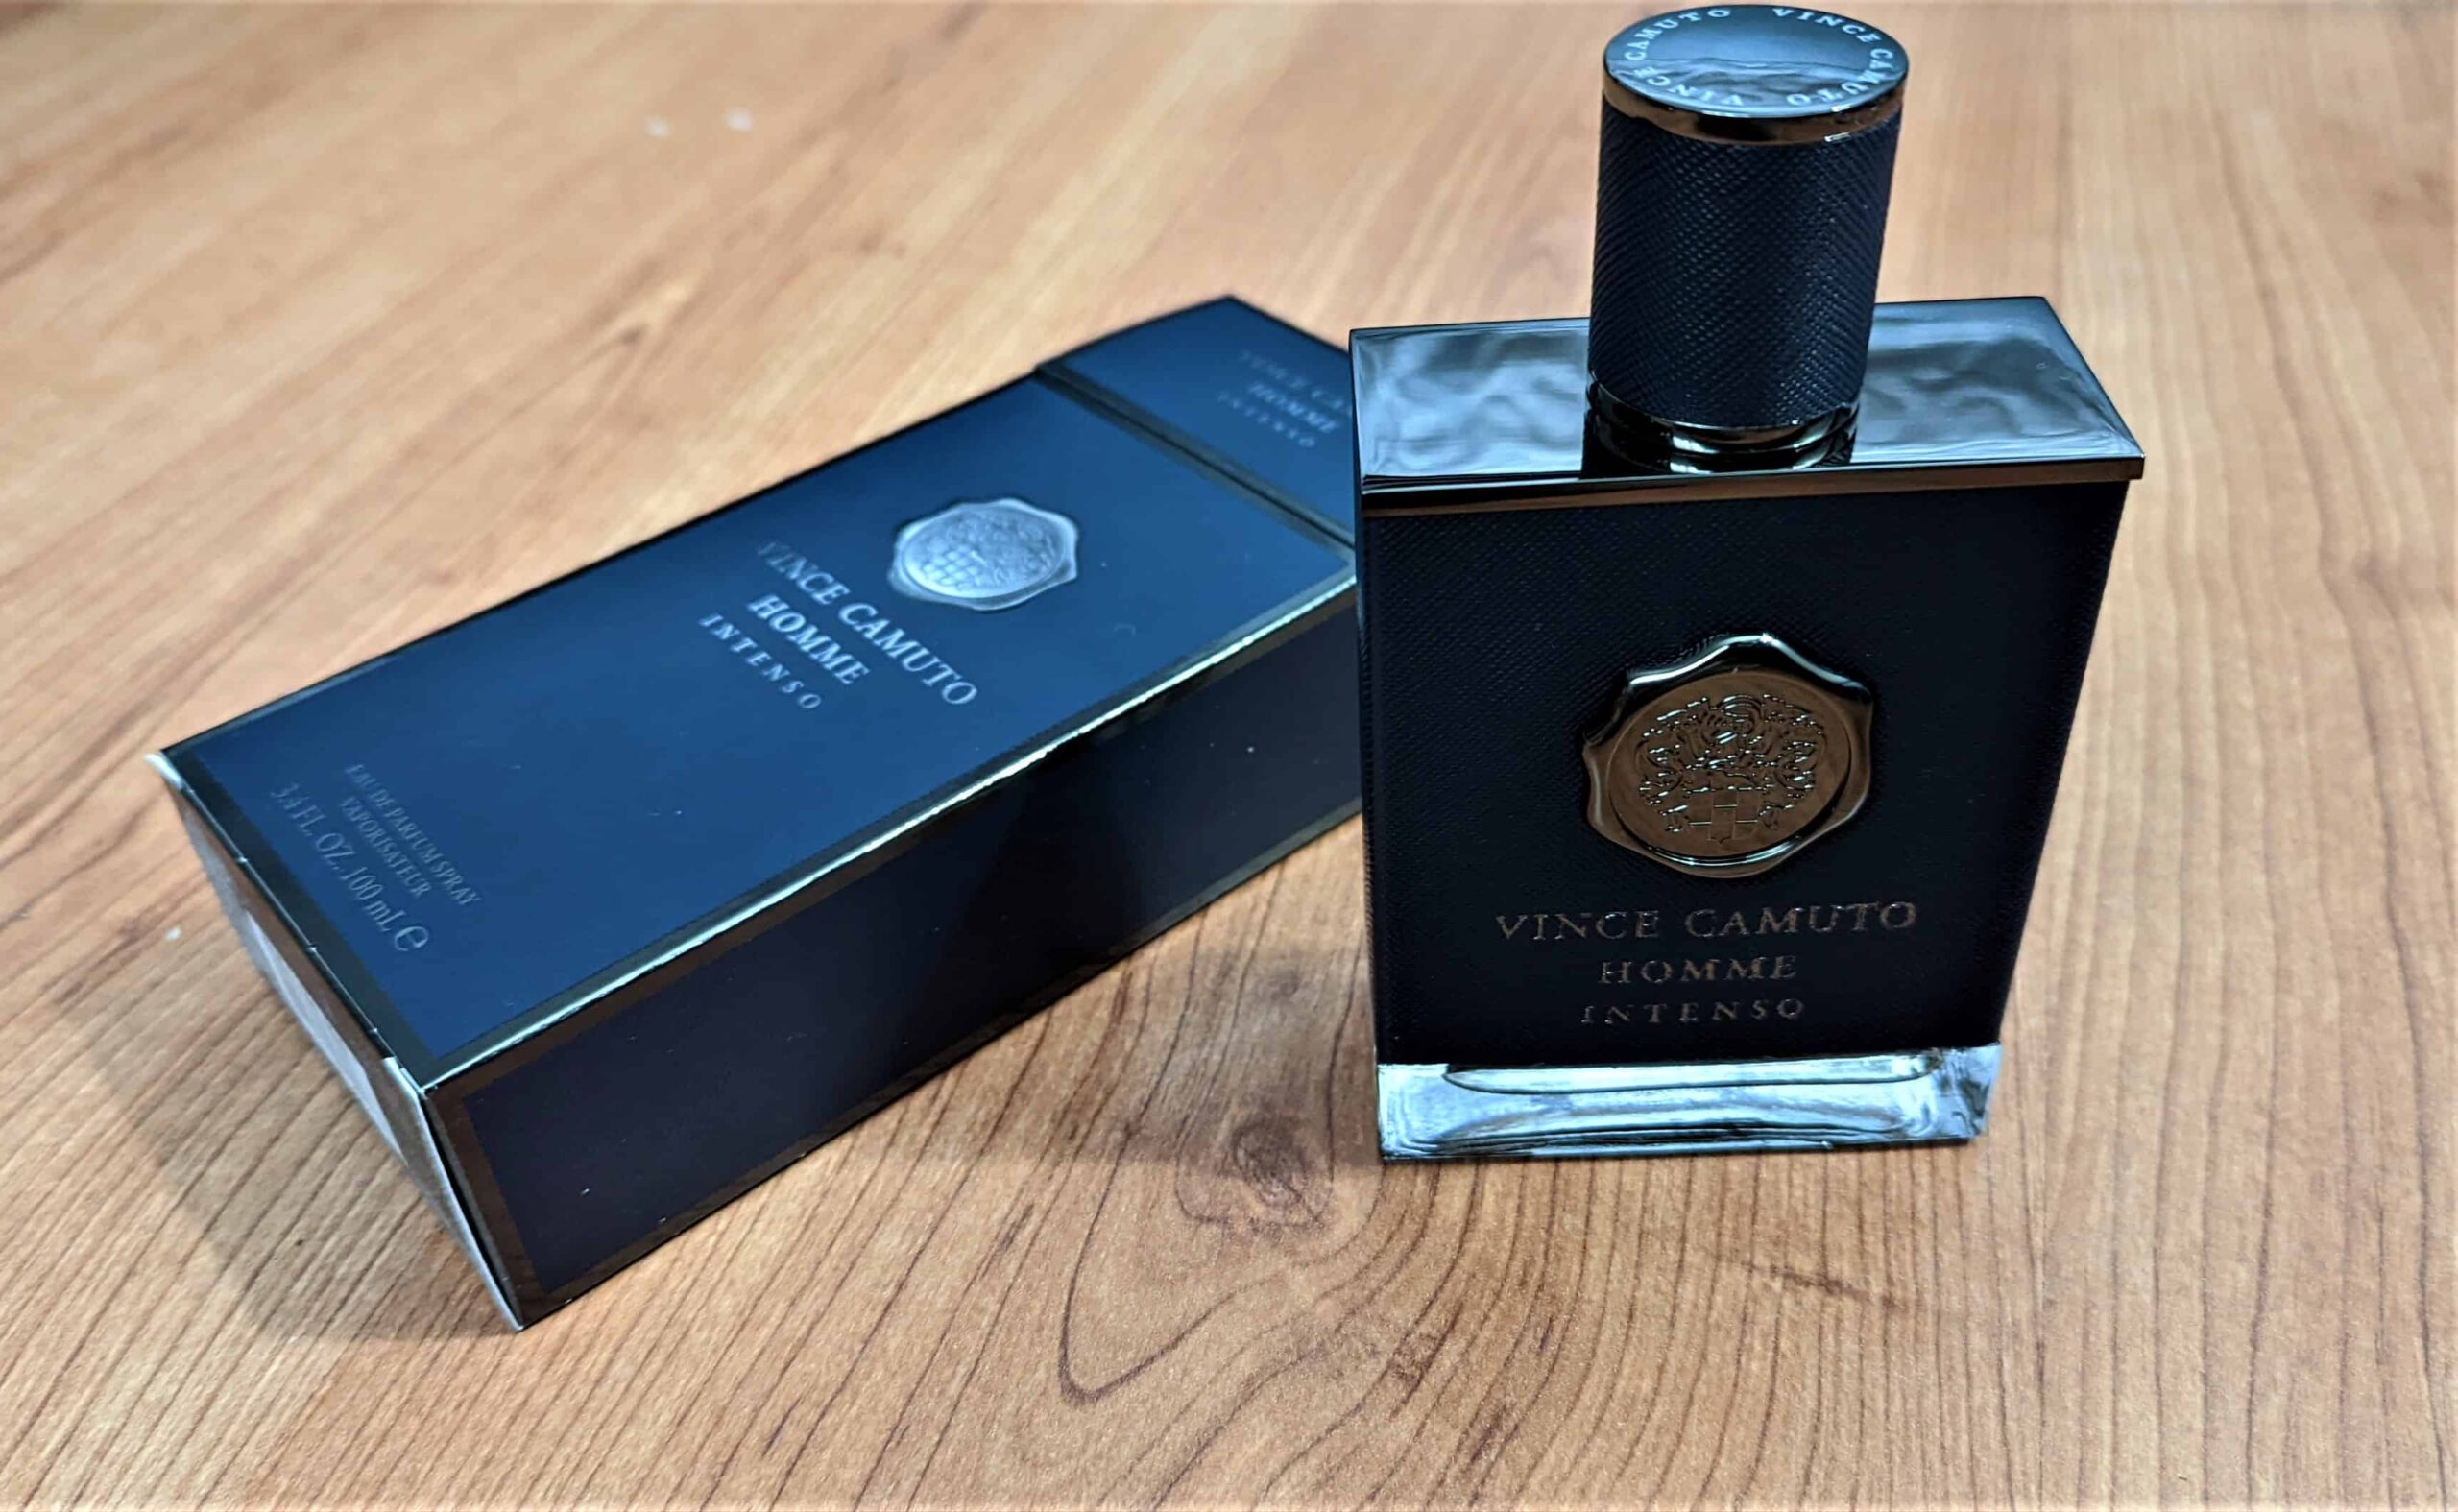 Vince Camuto Homme Intenso parfum scaled